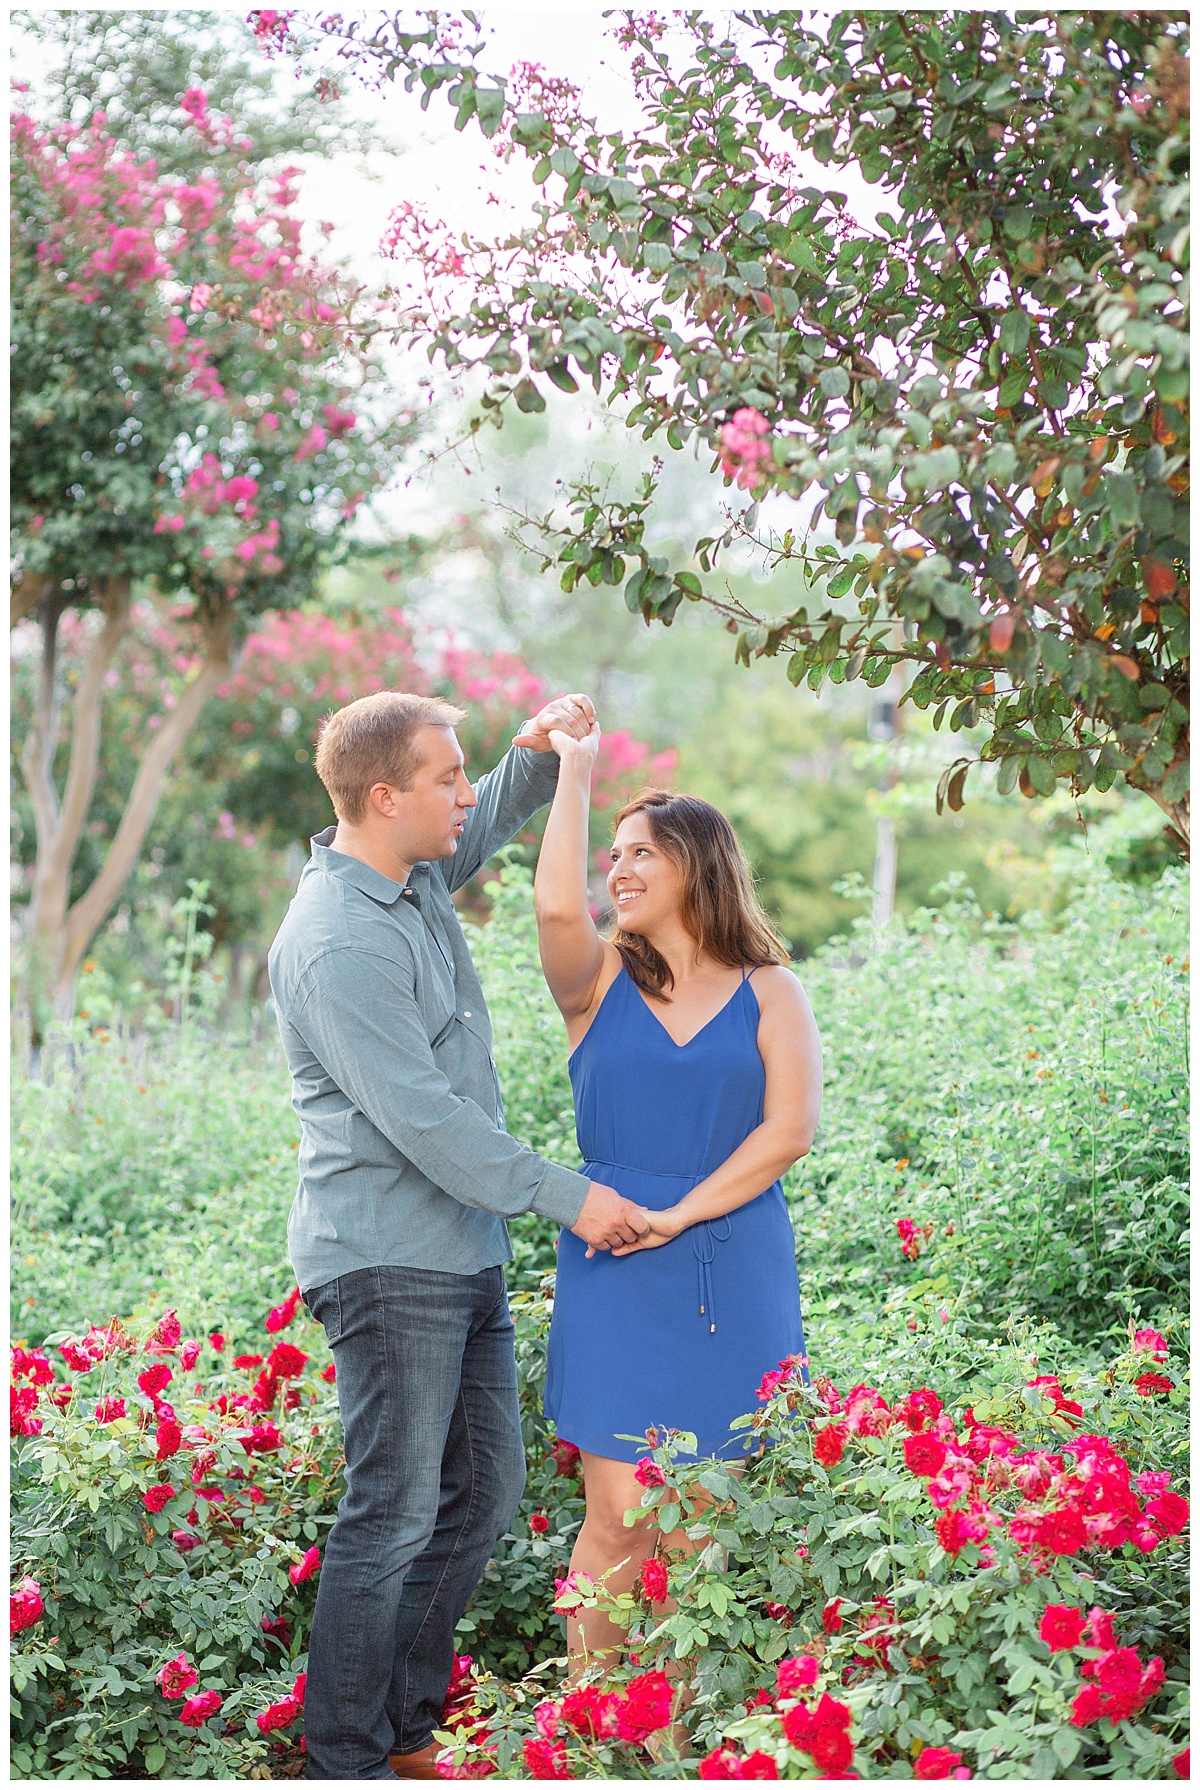 Texas Engagement Session | Monica Brown Photography | monicabrownphoto.com